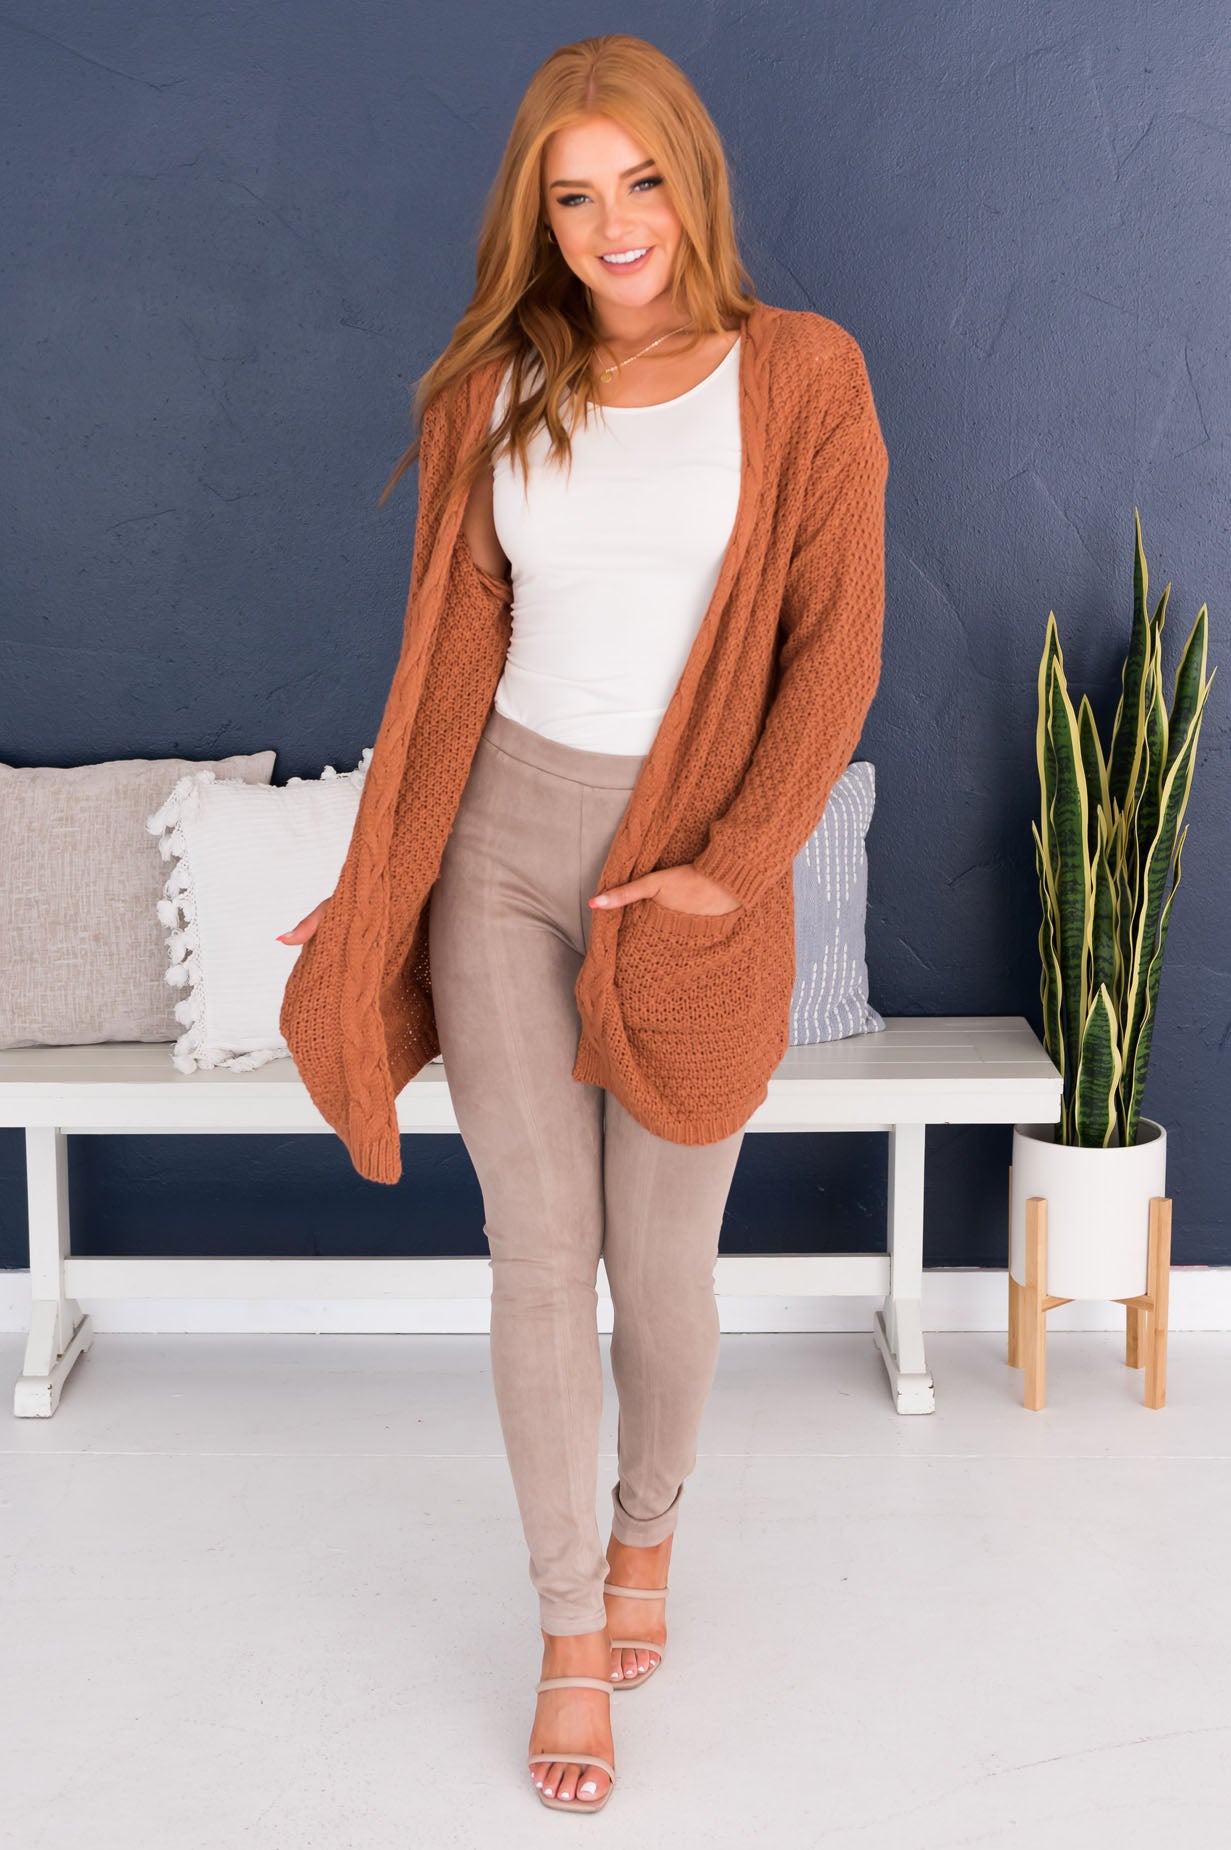 Falling in Your Arms Modest Front-Pocket Cardigan